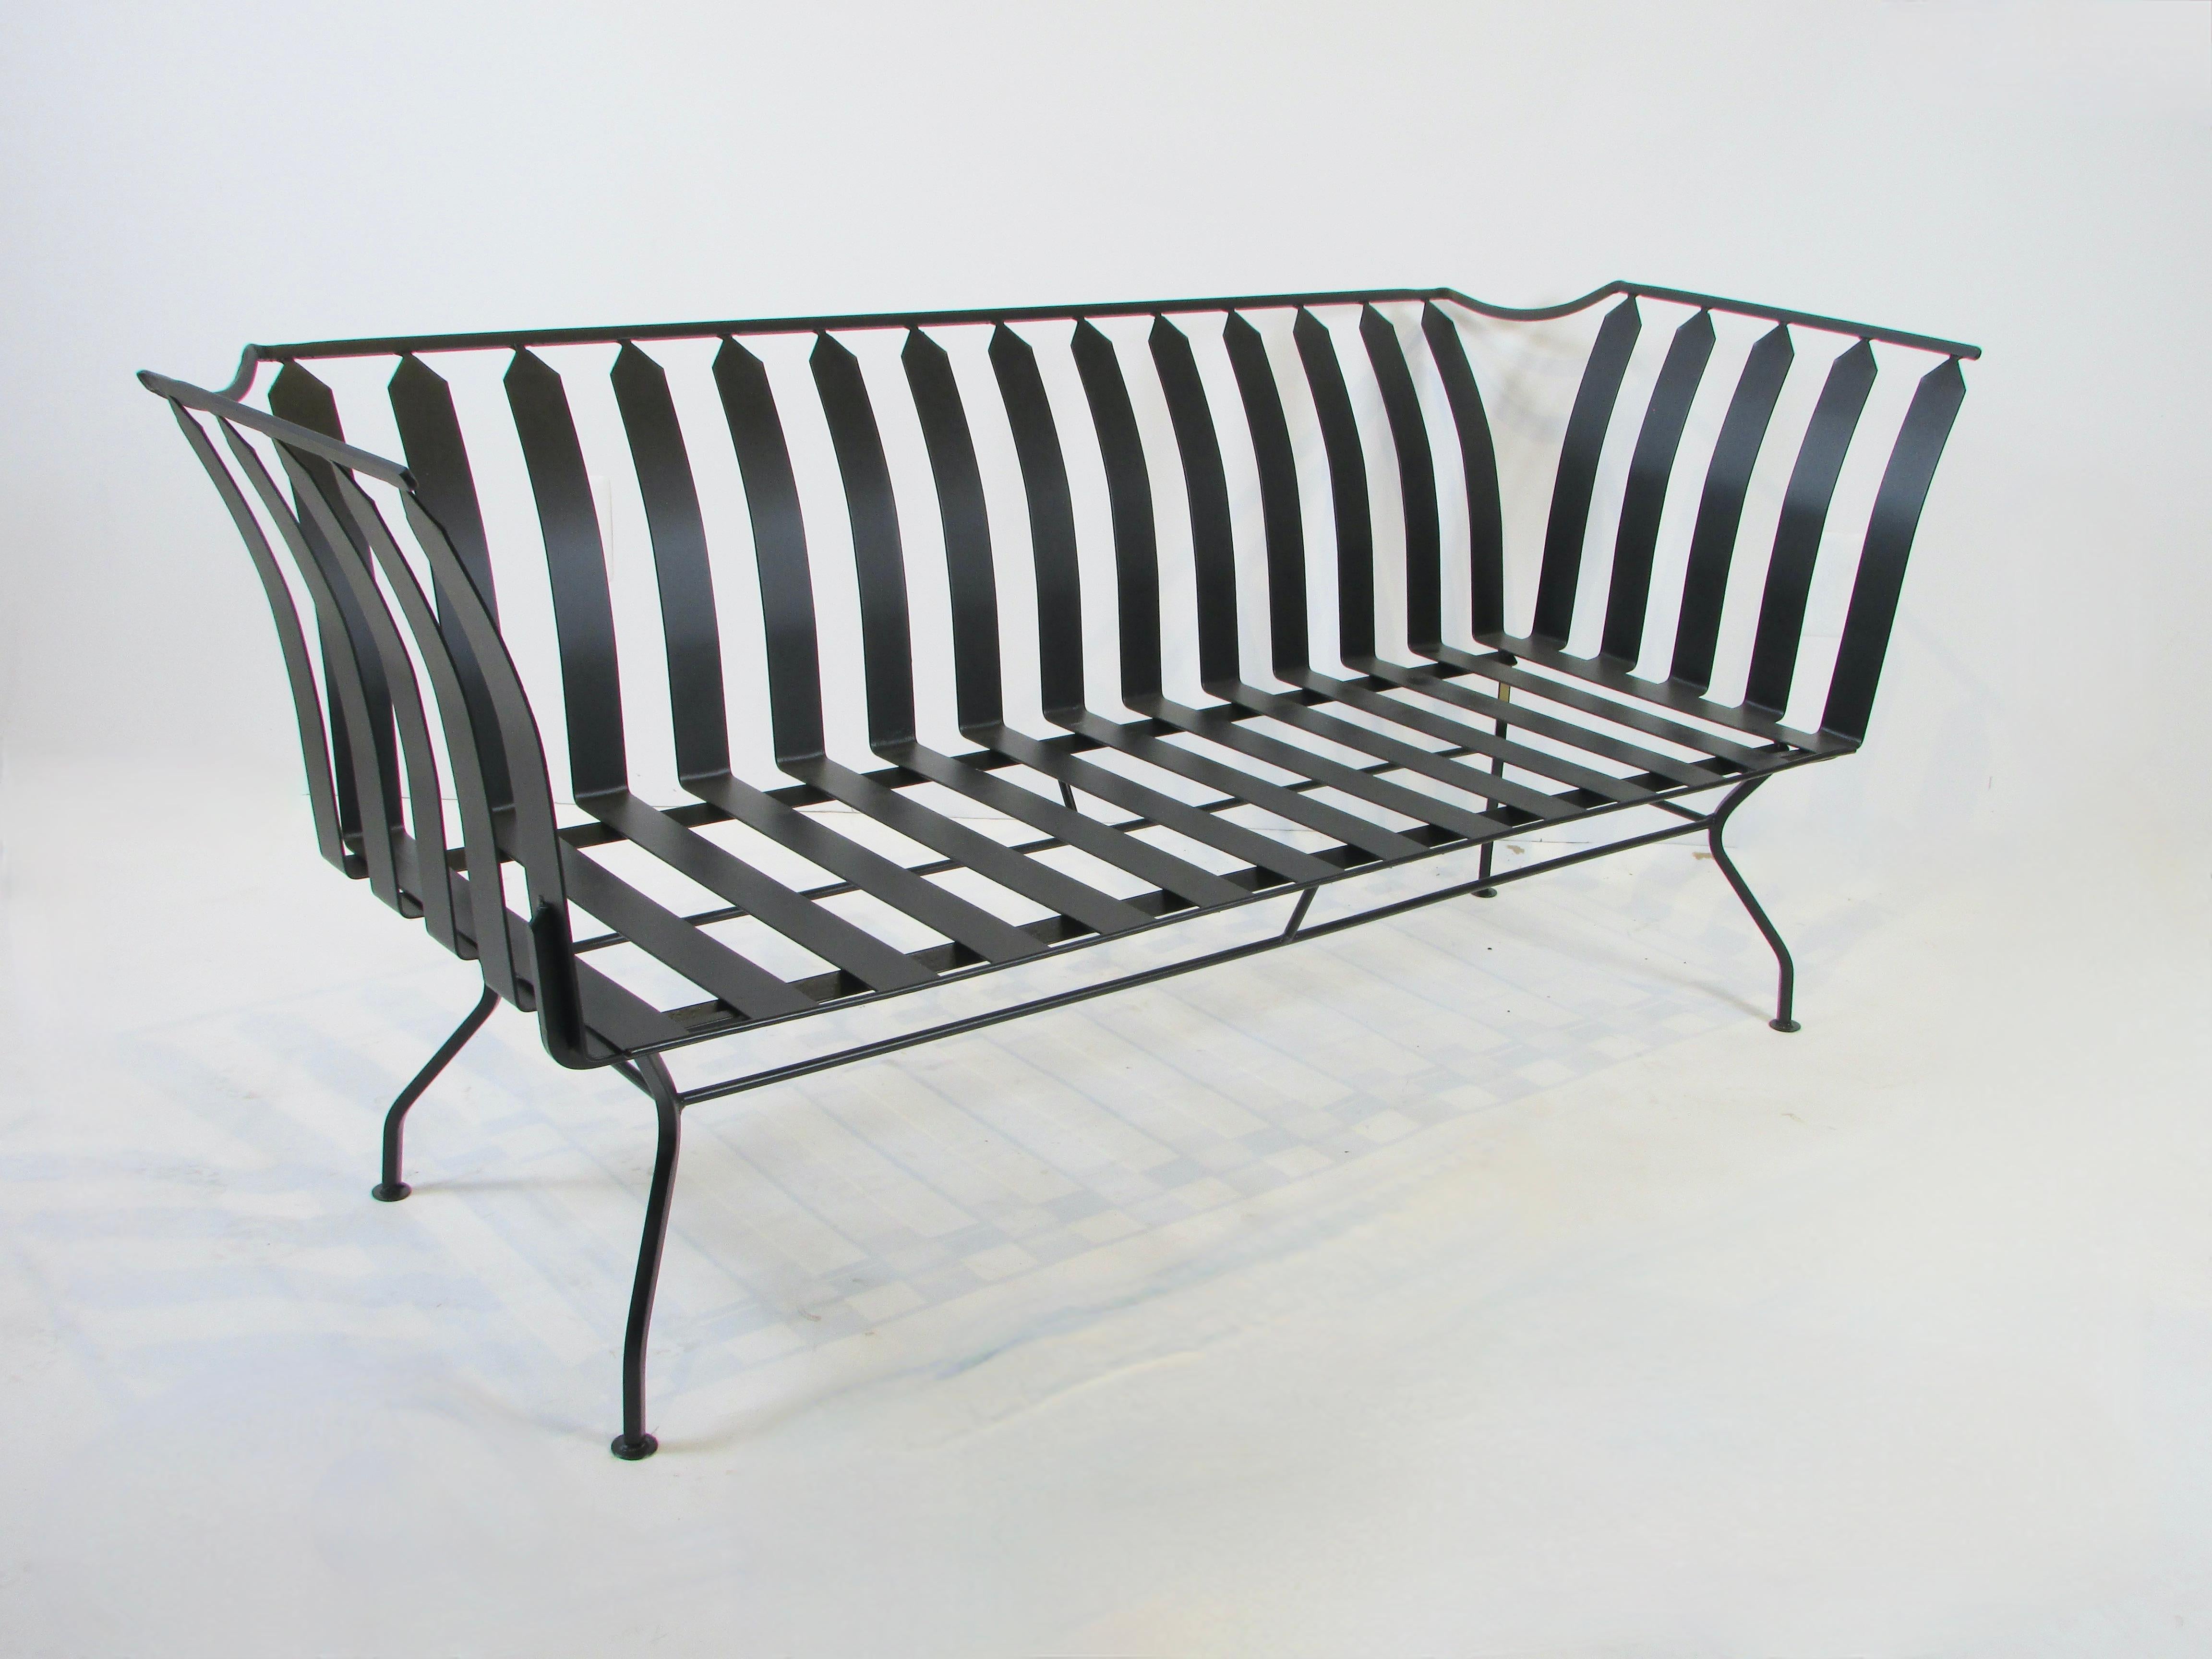 20th Century Classic influenced Modernist Wrought Iron Garden Bench in Matte Black Finish